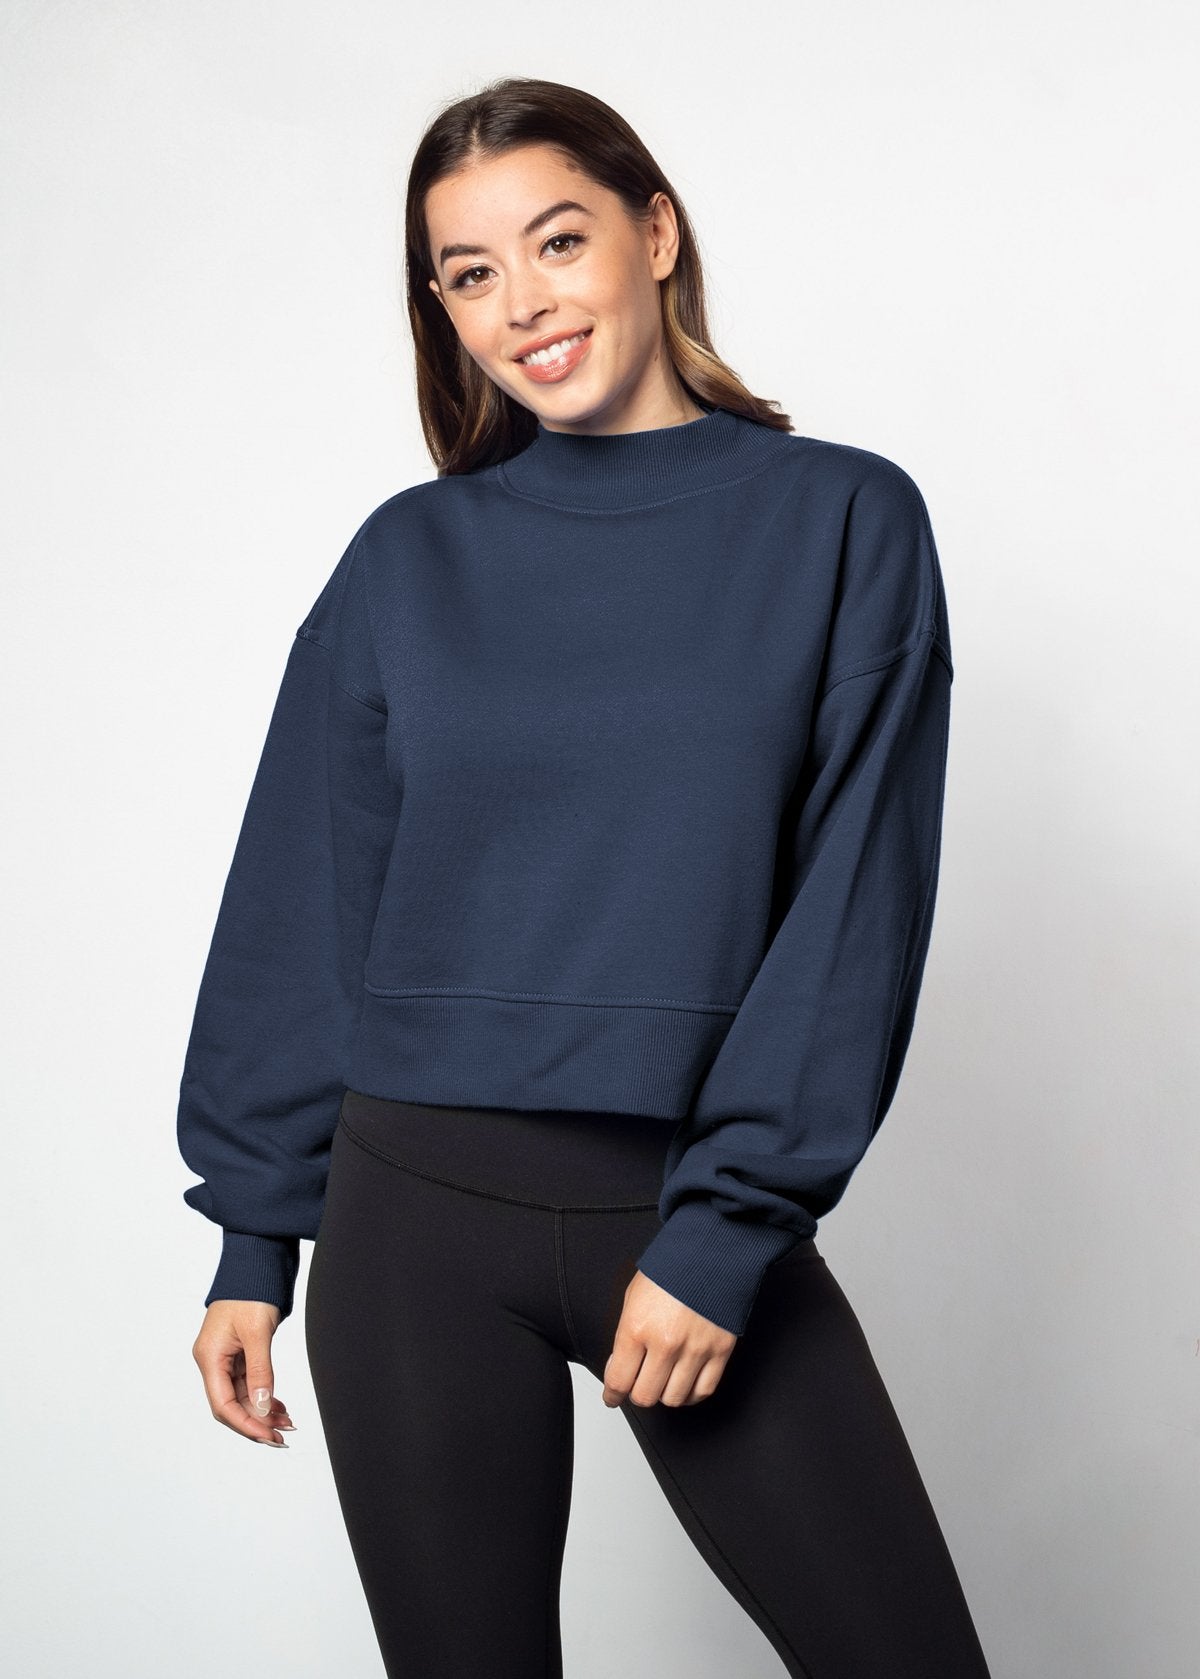 Navy mockneck sweatshirt with dropped shoulders, balloon sleeves, ribbed neck, sleeves and hem. Cropped relaxed silhouette